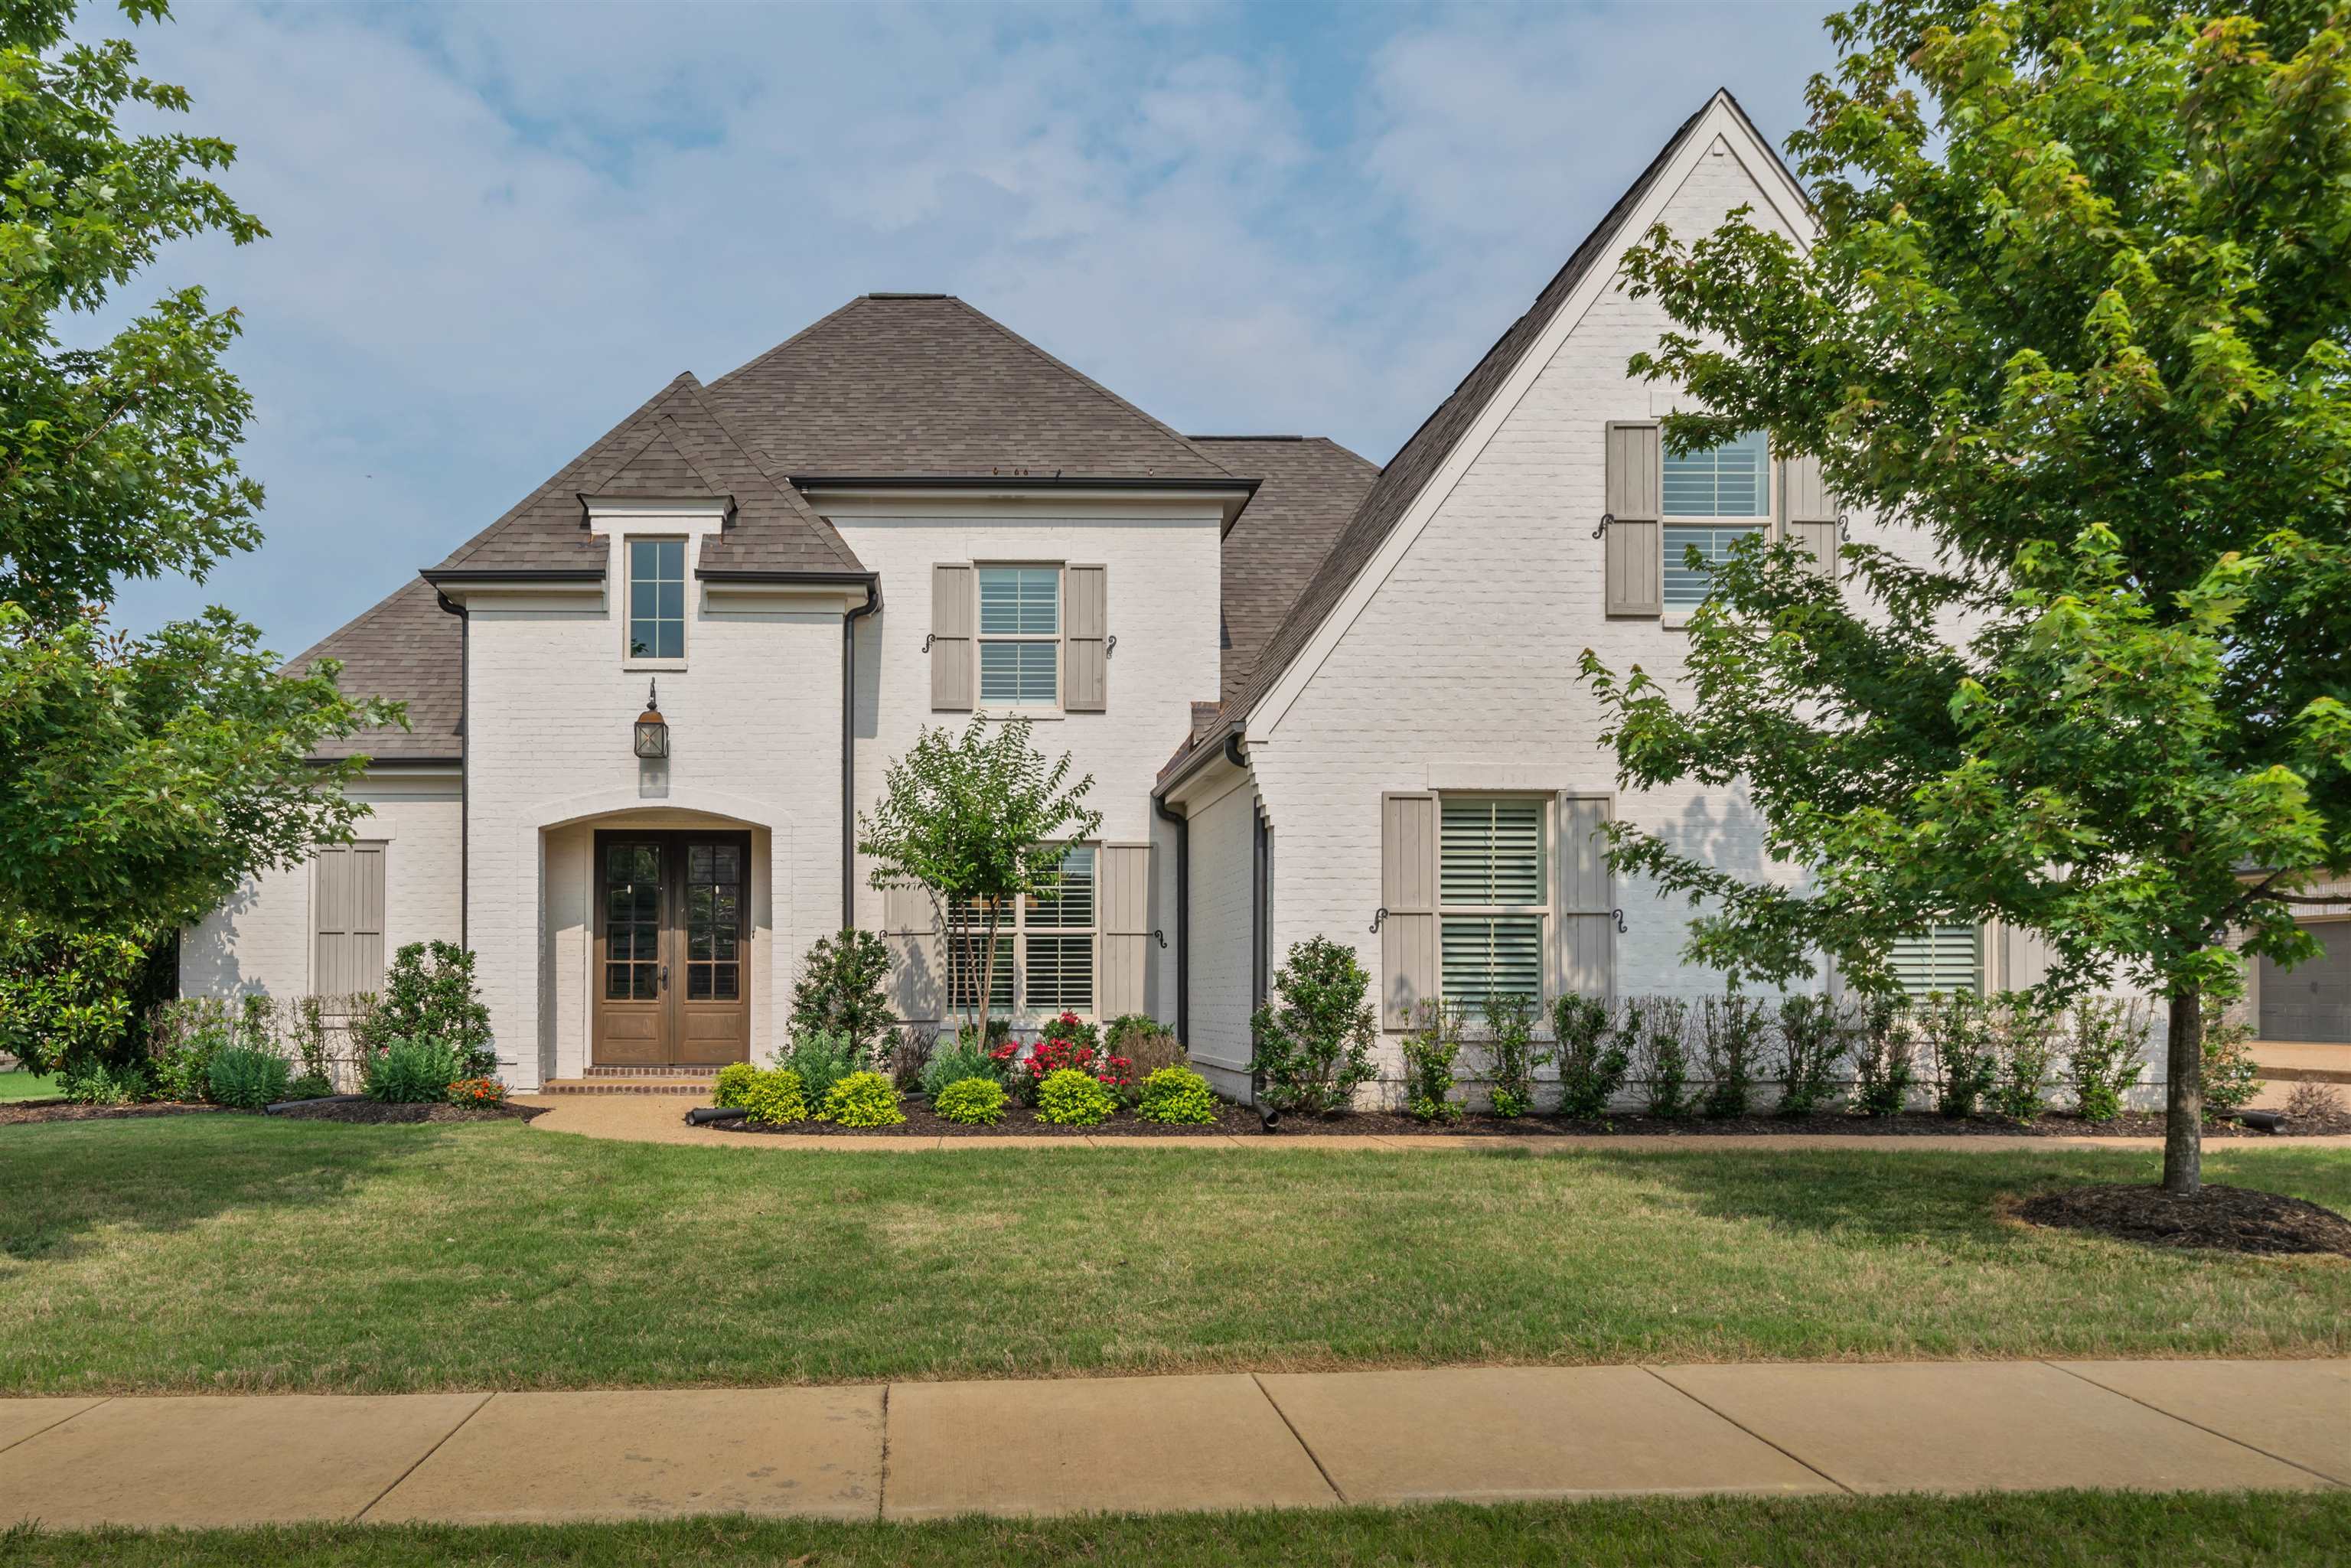 614 CYPRESS KNOLL DR, Collierville, TN 38017